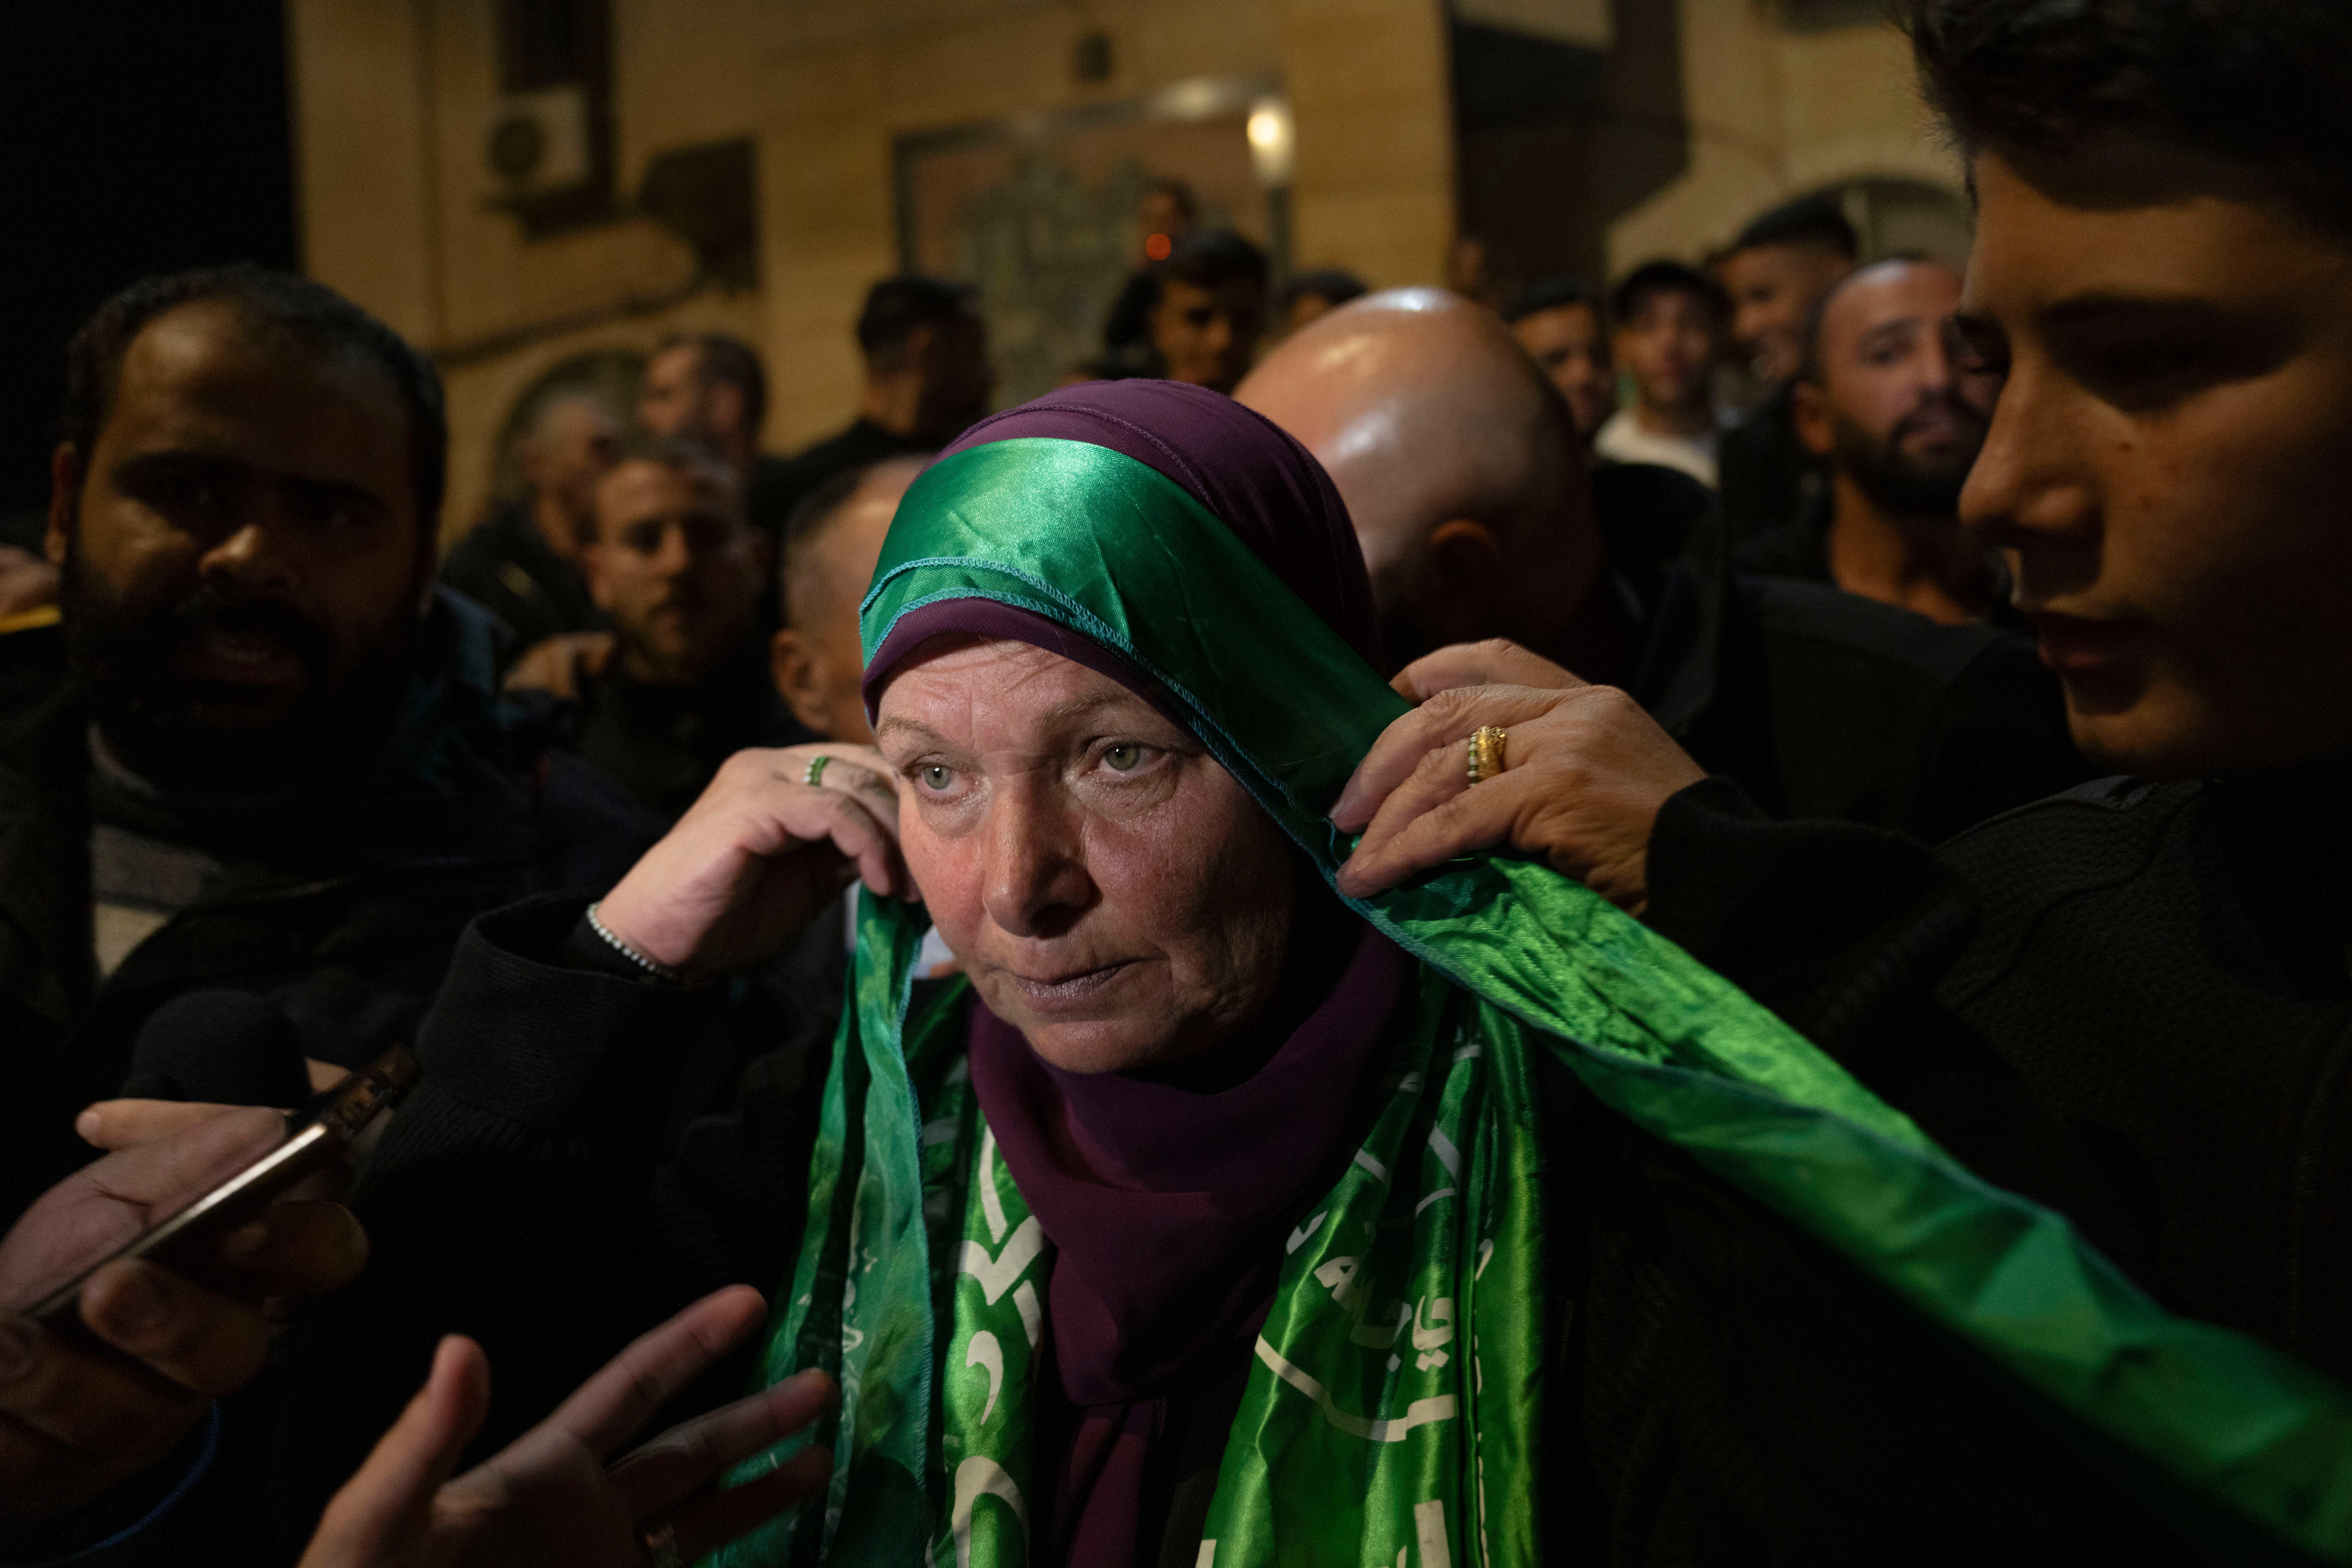 Former Palestinian female prisoner Hanna Barghouti wears a Hamas headband while she is received by supporters upon her arrival in the West Bank town of Beitunia